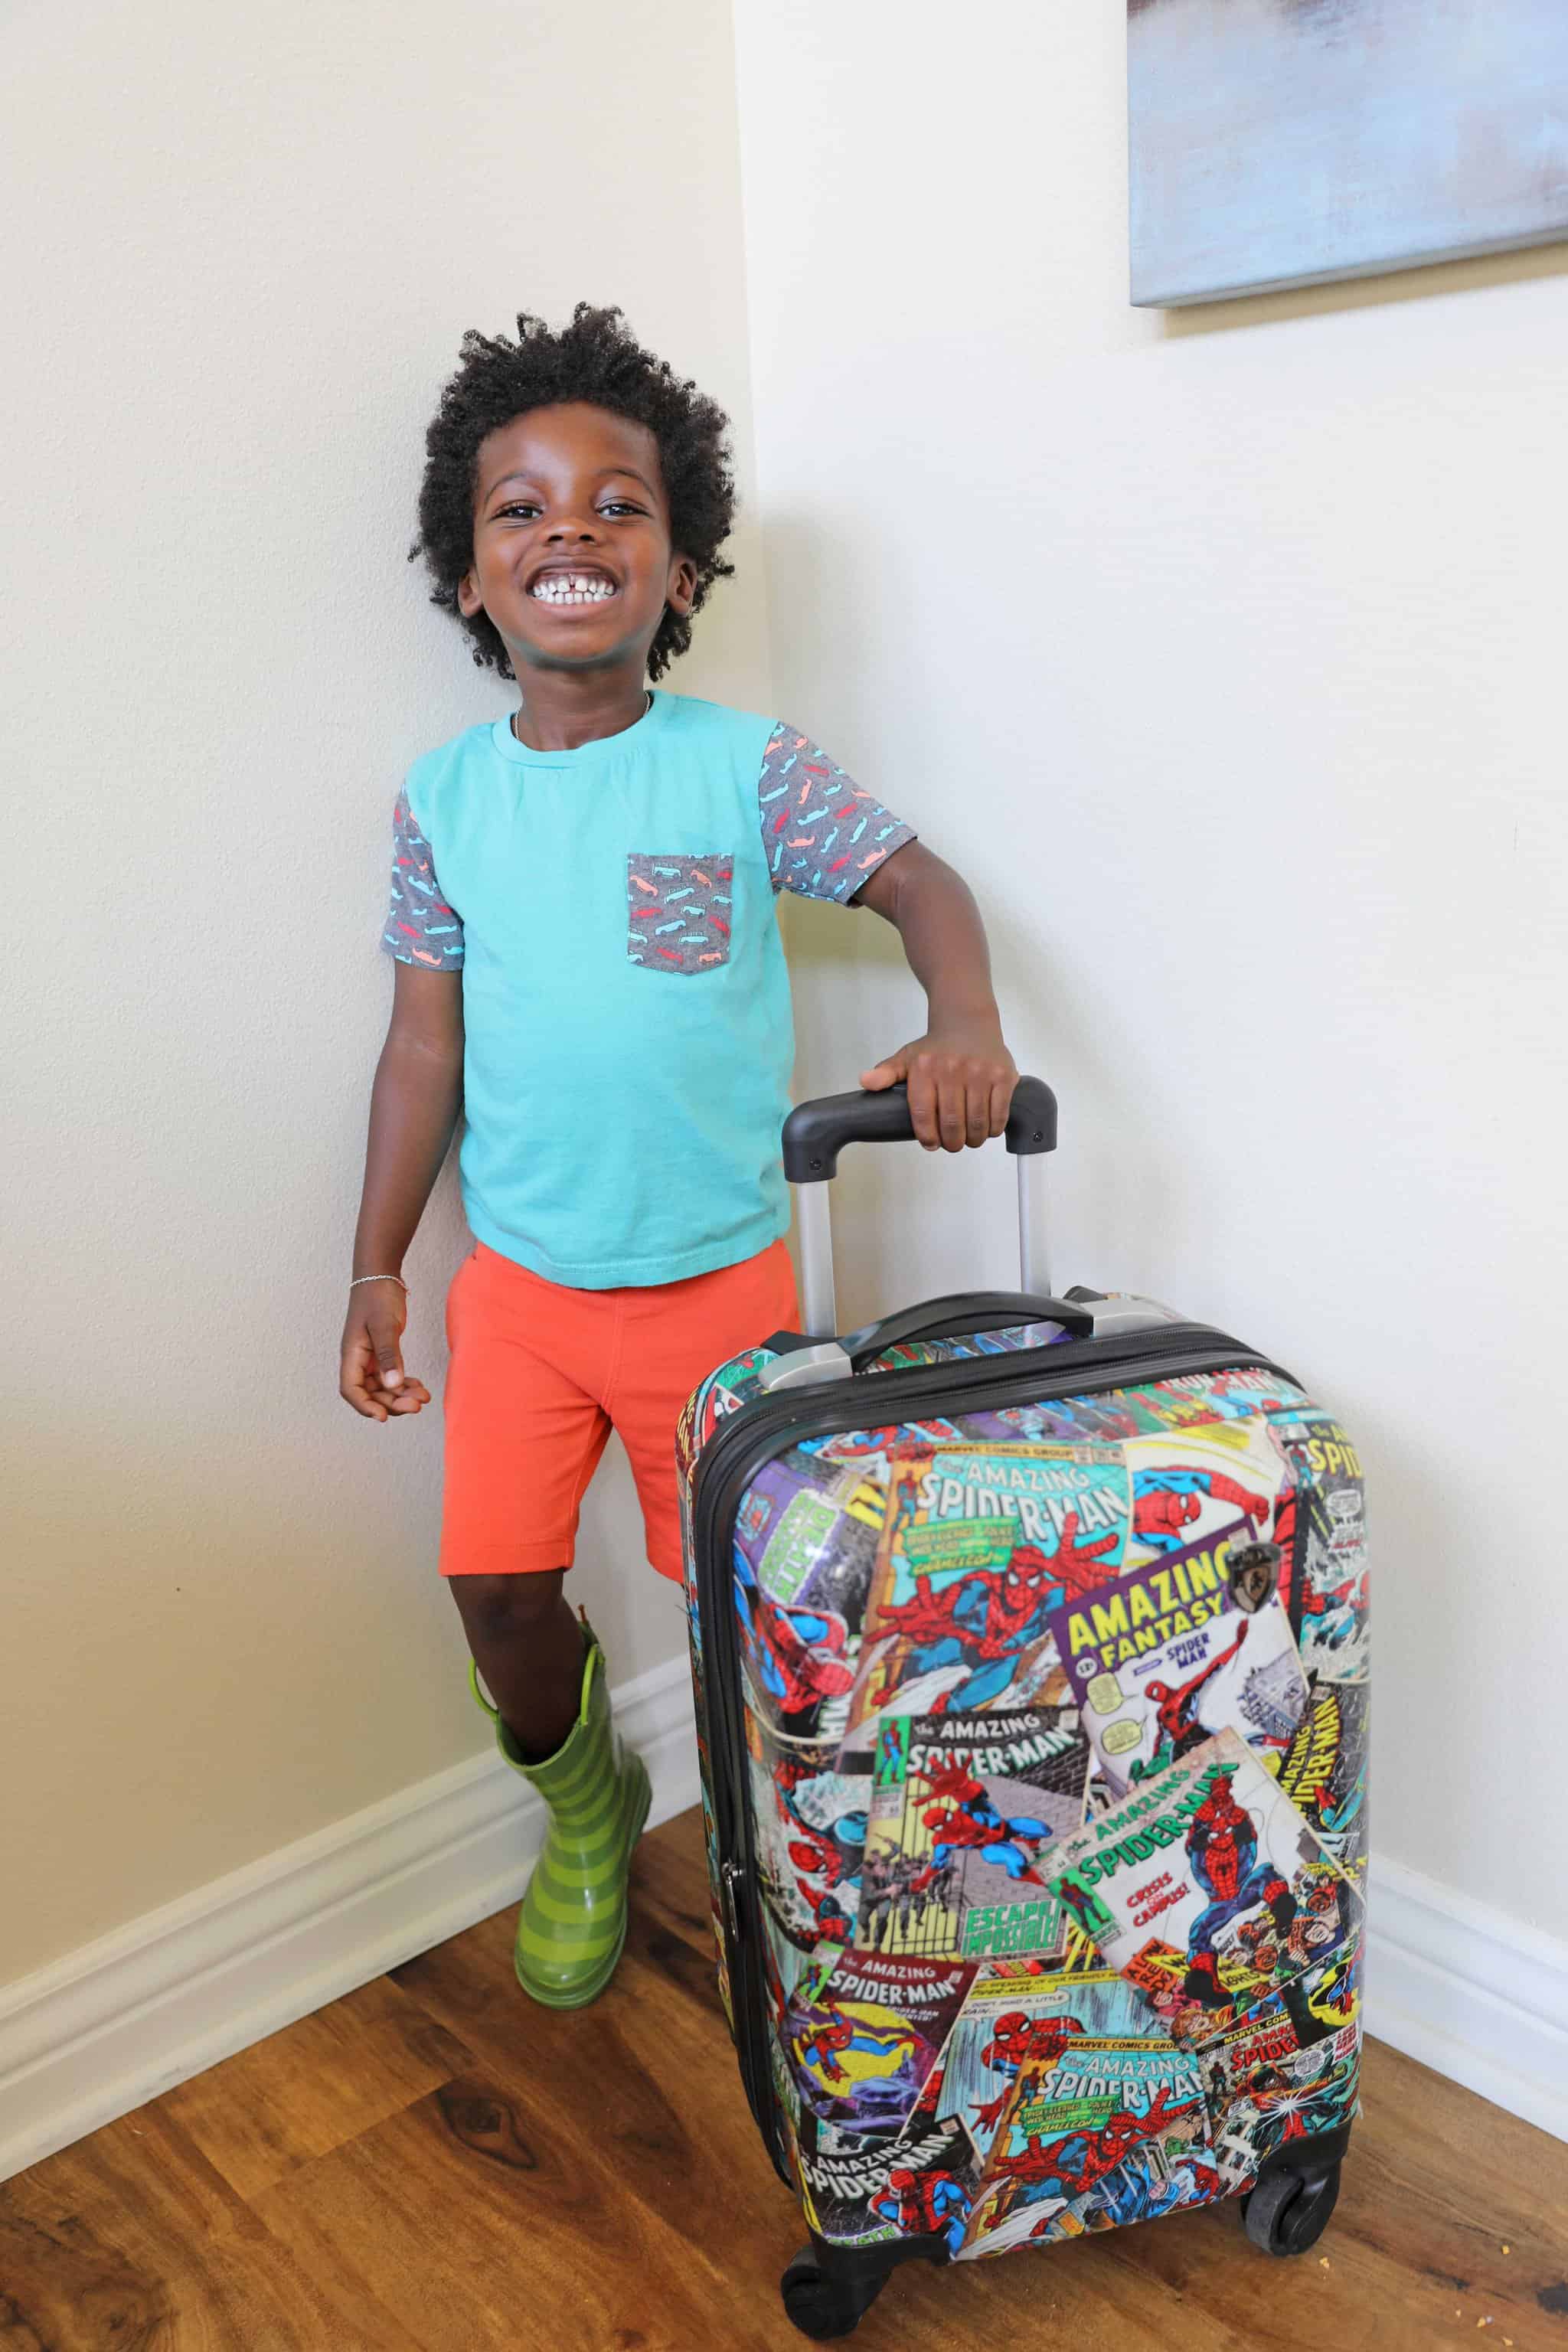 The Best Luggage for Kids to Tote Around Themselves